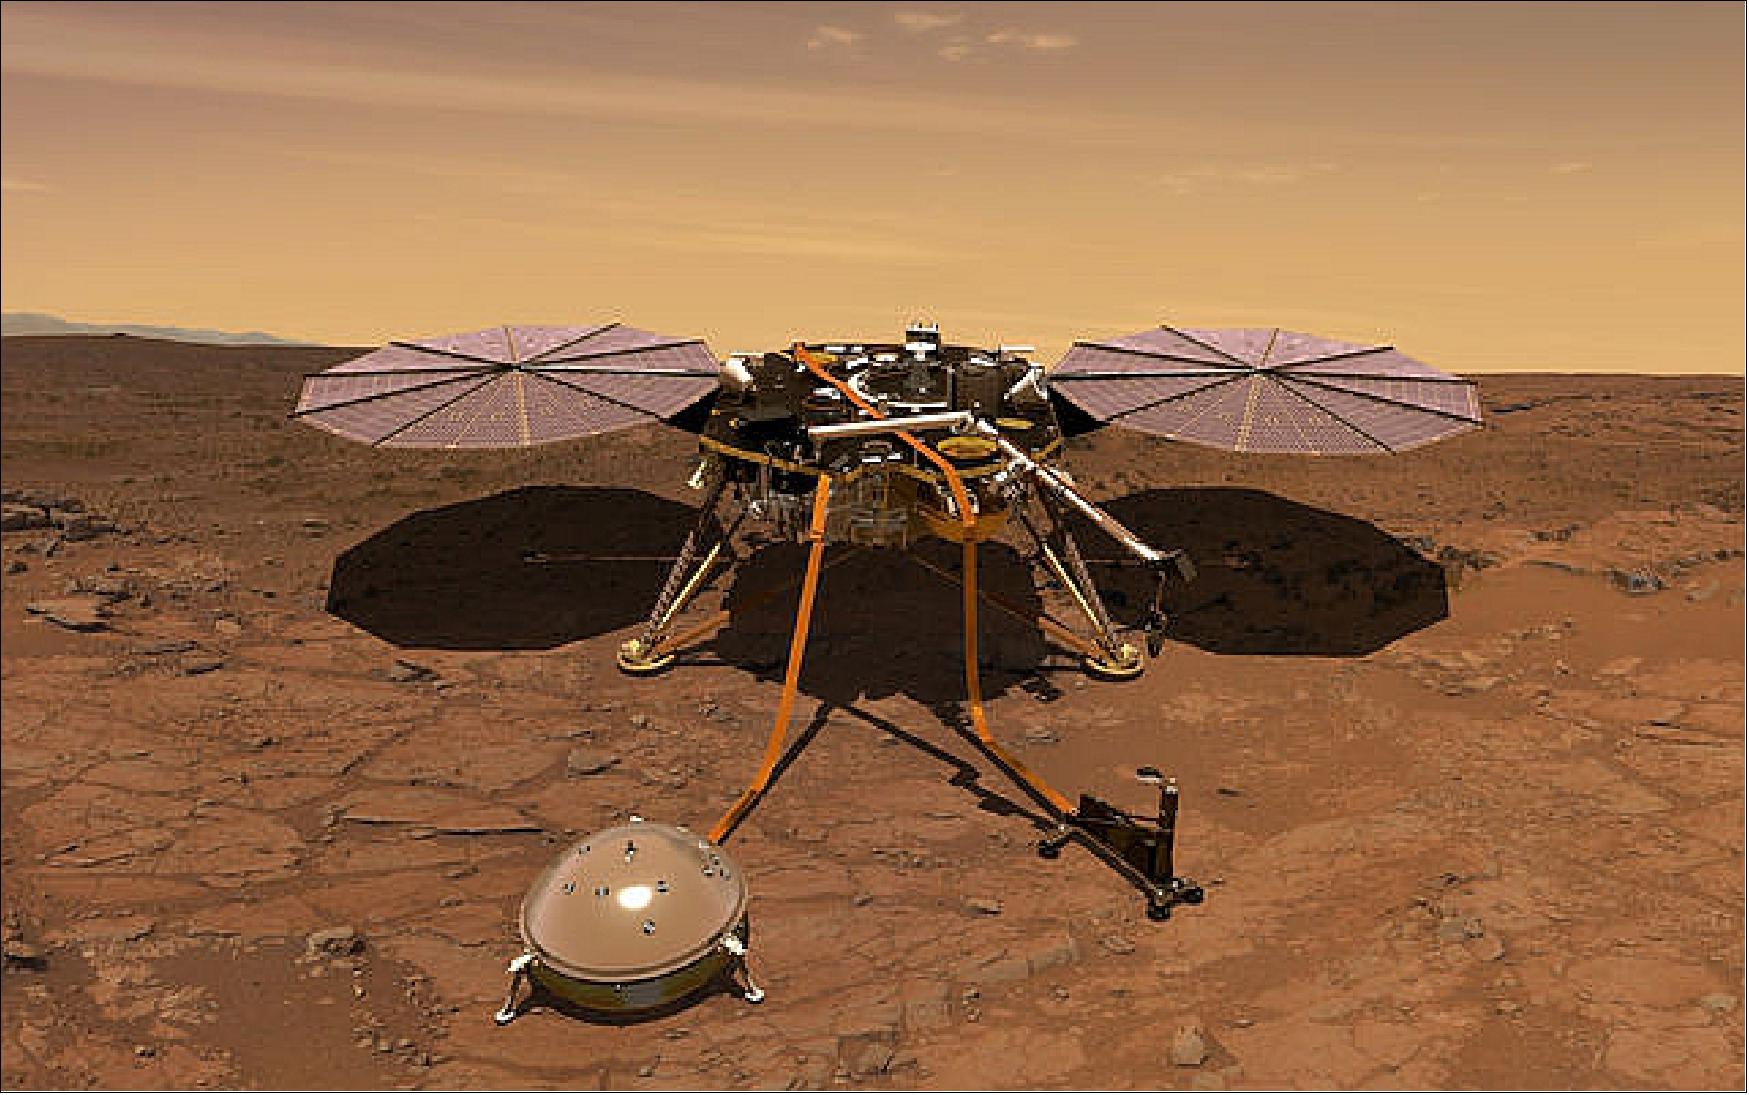 Figure 2: An artist's rendition of the InSight lander operating on the surface of Mars (image credit: NASA/JPL-Caltech)